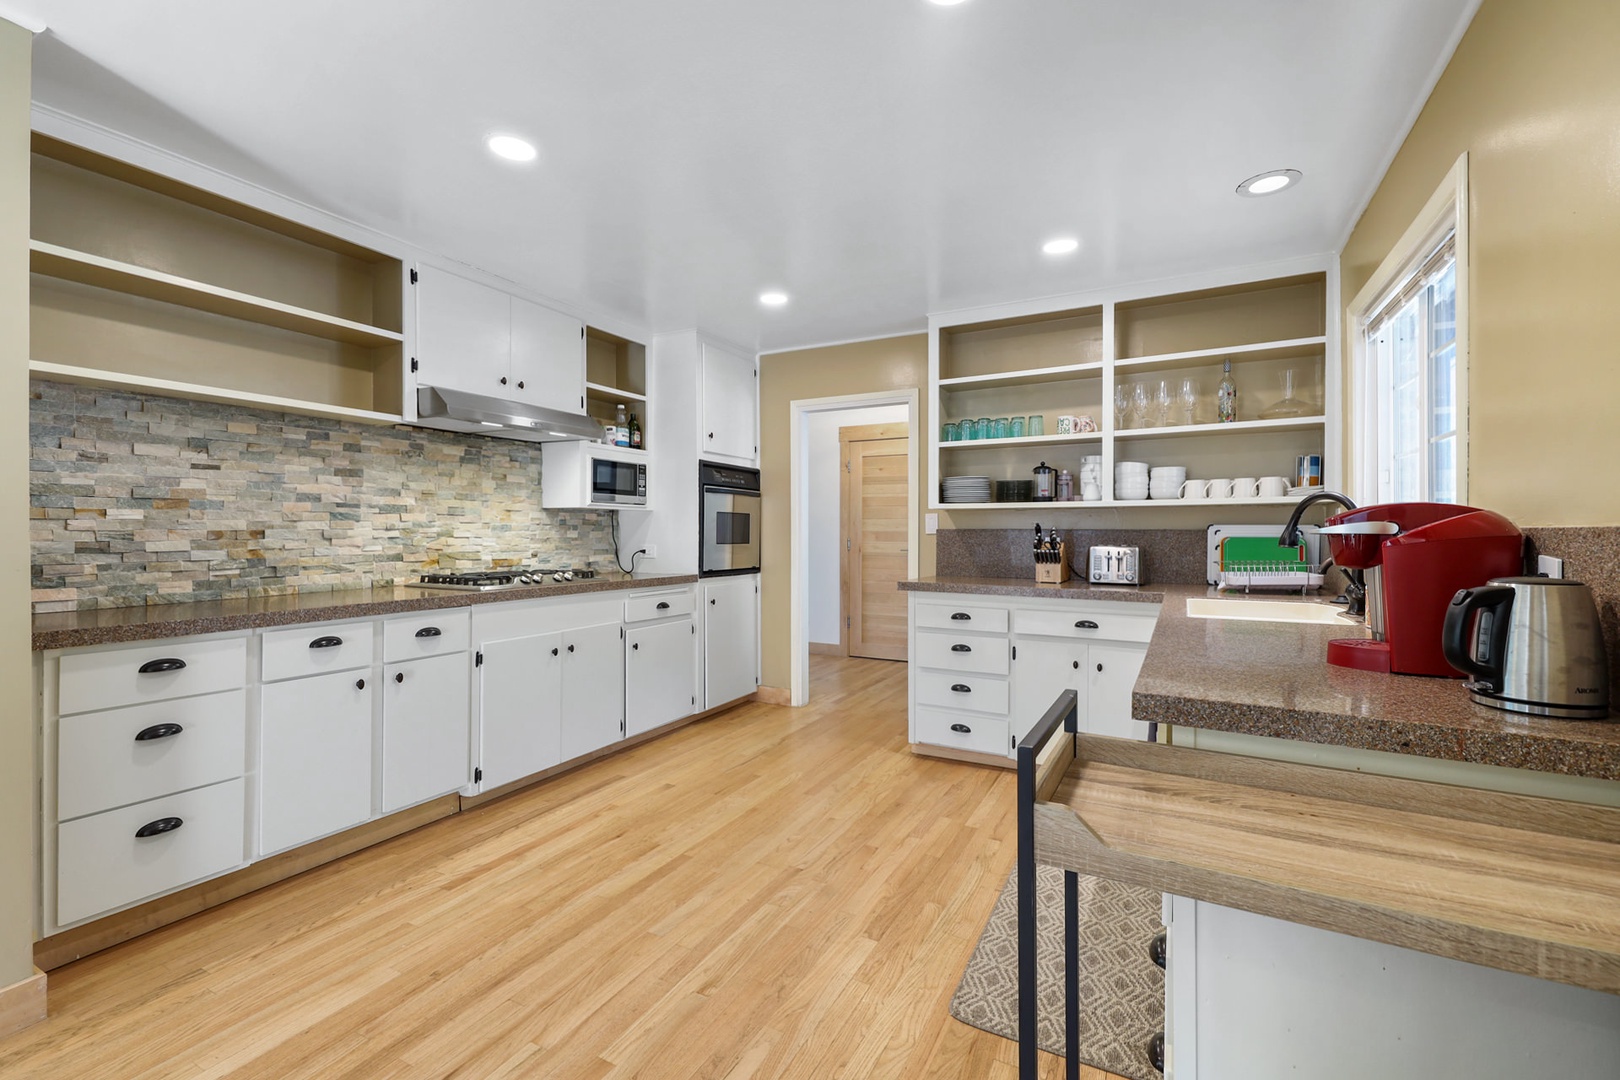 Kitchen is semi-updated with lots of storage!